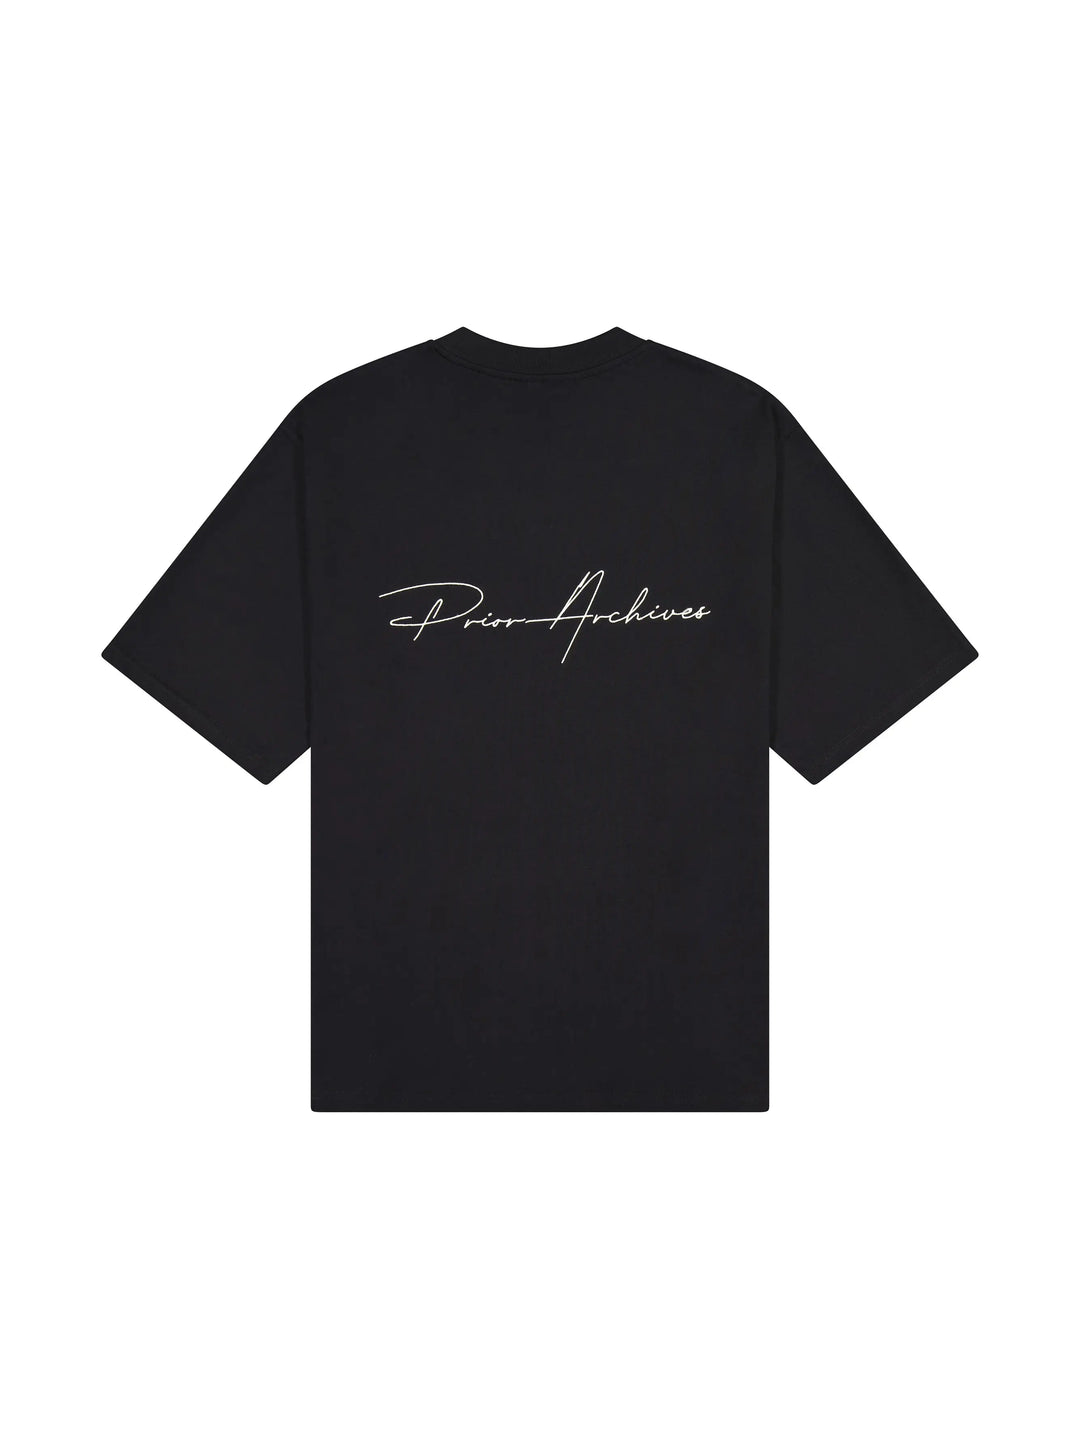 Prior Embroidery Logo Oversized T-shirt Onyx in Auckland, New Zealand - Shop name